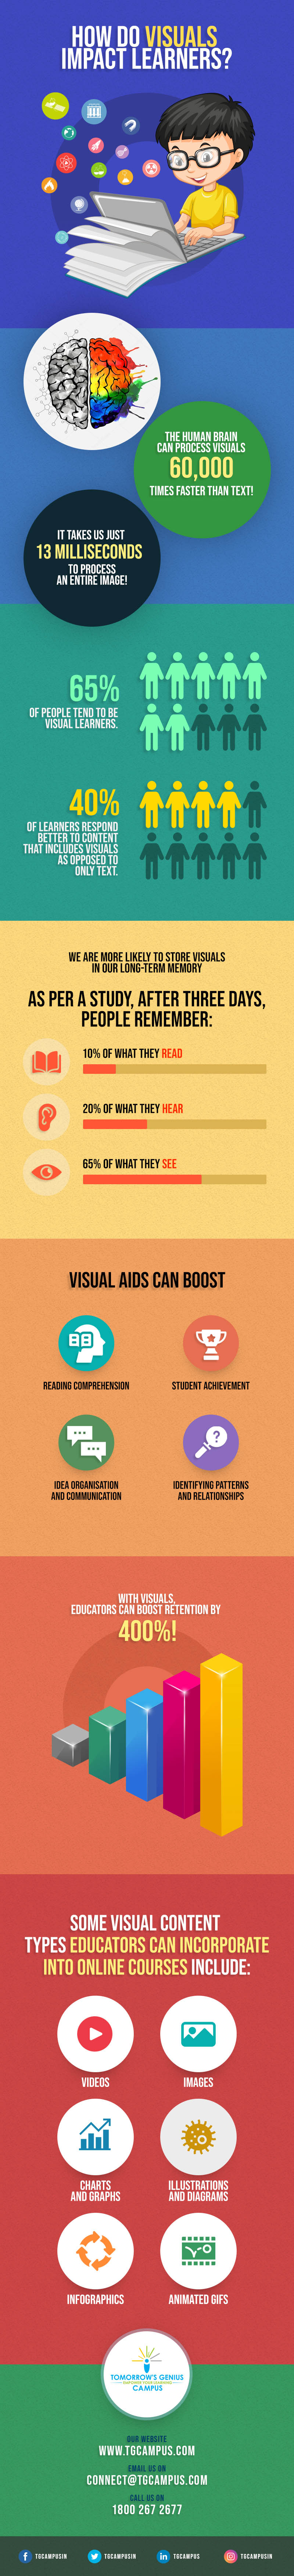 Why Are Visuals the Most Influential Aspect of Online Learning?